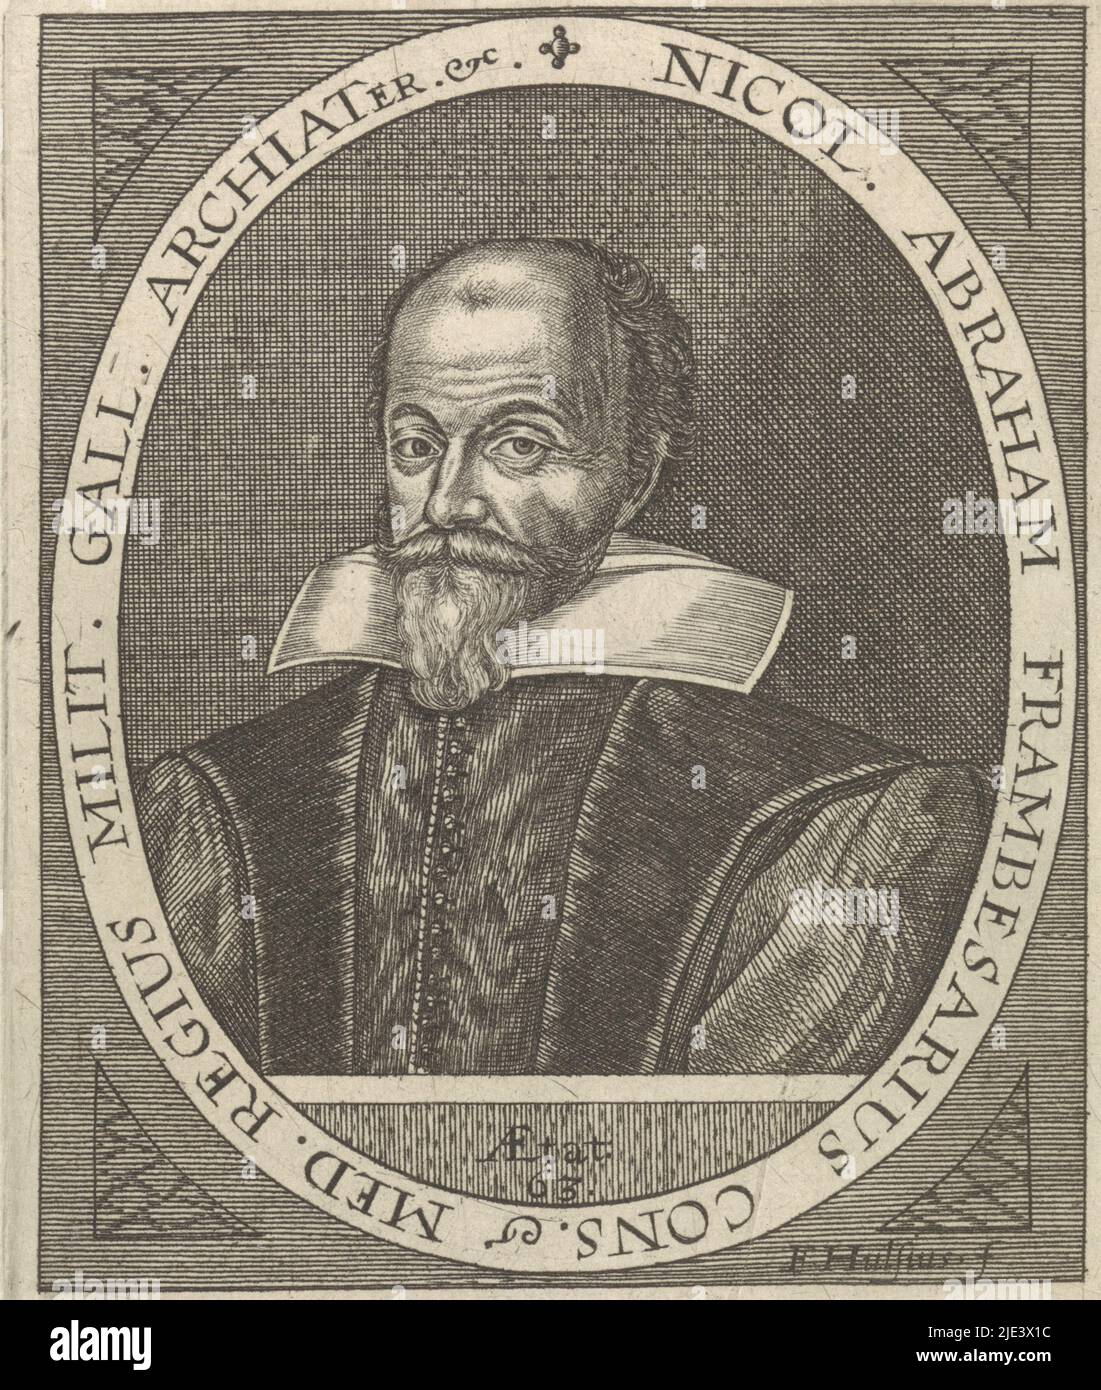 Portrait of Nicolas Abraham de La Framboisière, Friedrich van Hulsen, 1590 - 1665, Bust of Nicolas Abraham de La Framboisière, turned slightly to the left, in an oval with margin lettering in Latin. Below four lines of text in Latin., print maker: Friedrich van Hulsen, (mentioned on object), Germany, 1590 - 1665, paper, engraving, h 150 mm × w 104 mm Stock Photo